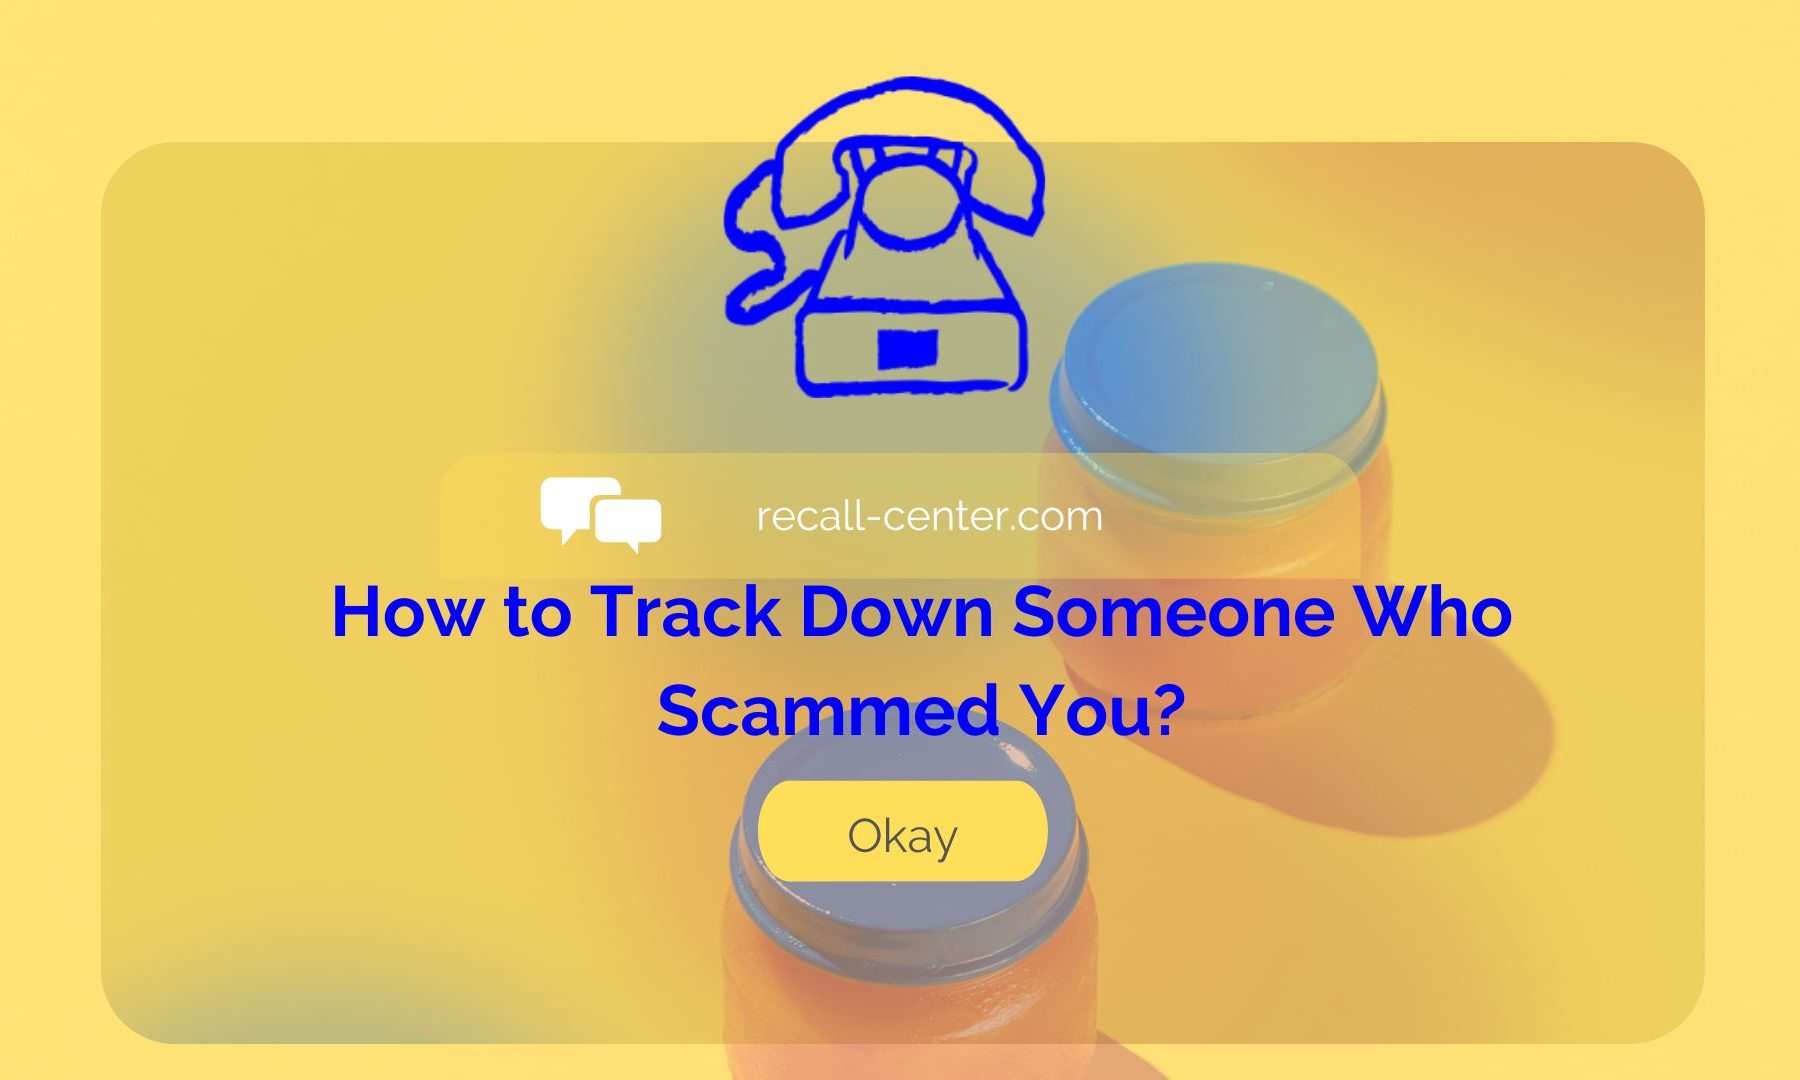 How to Track Down Someone Who Scammed You